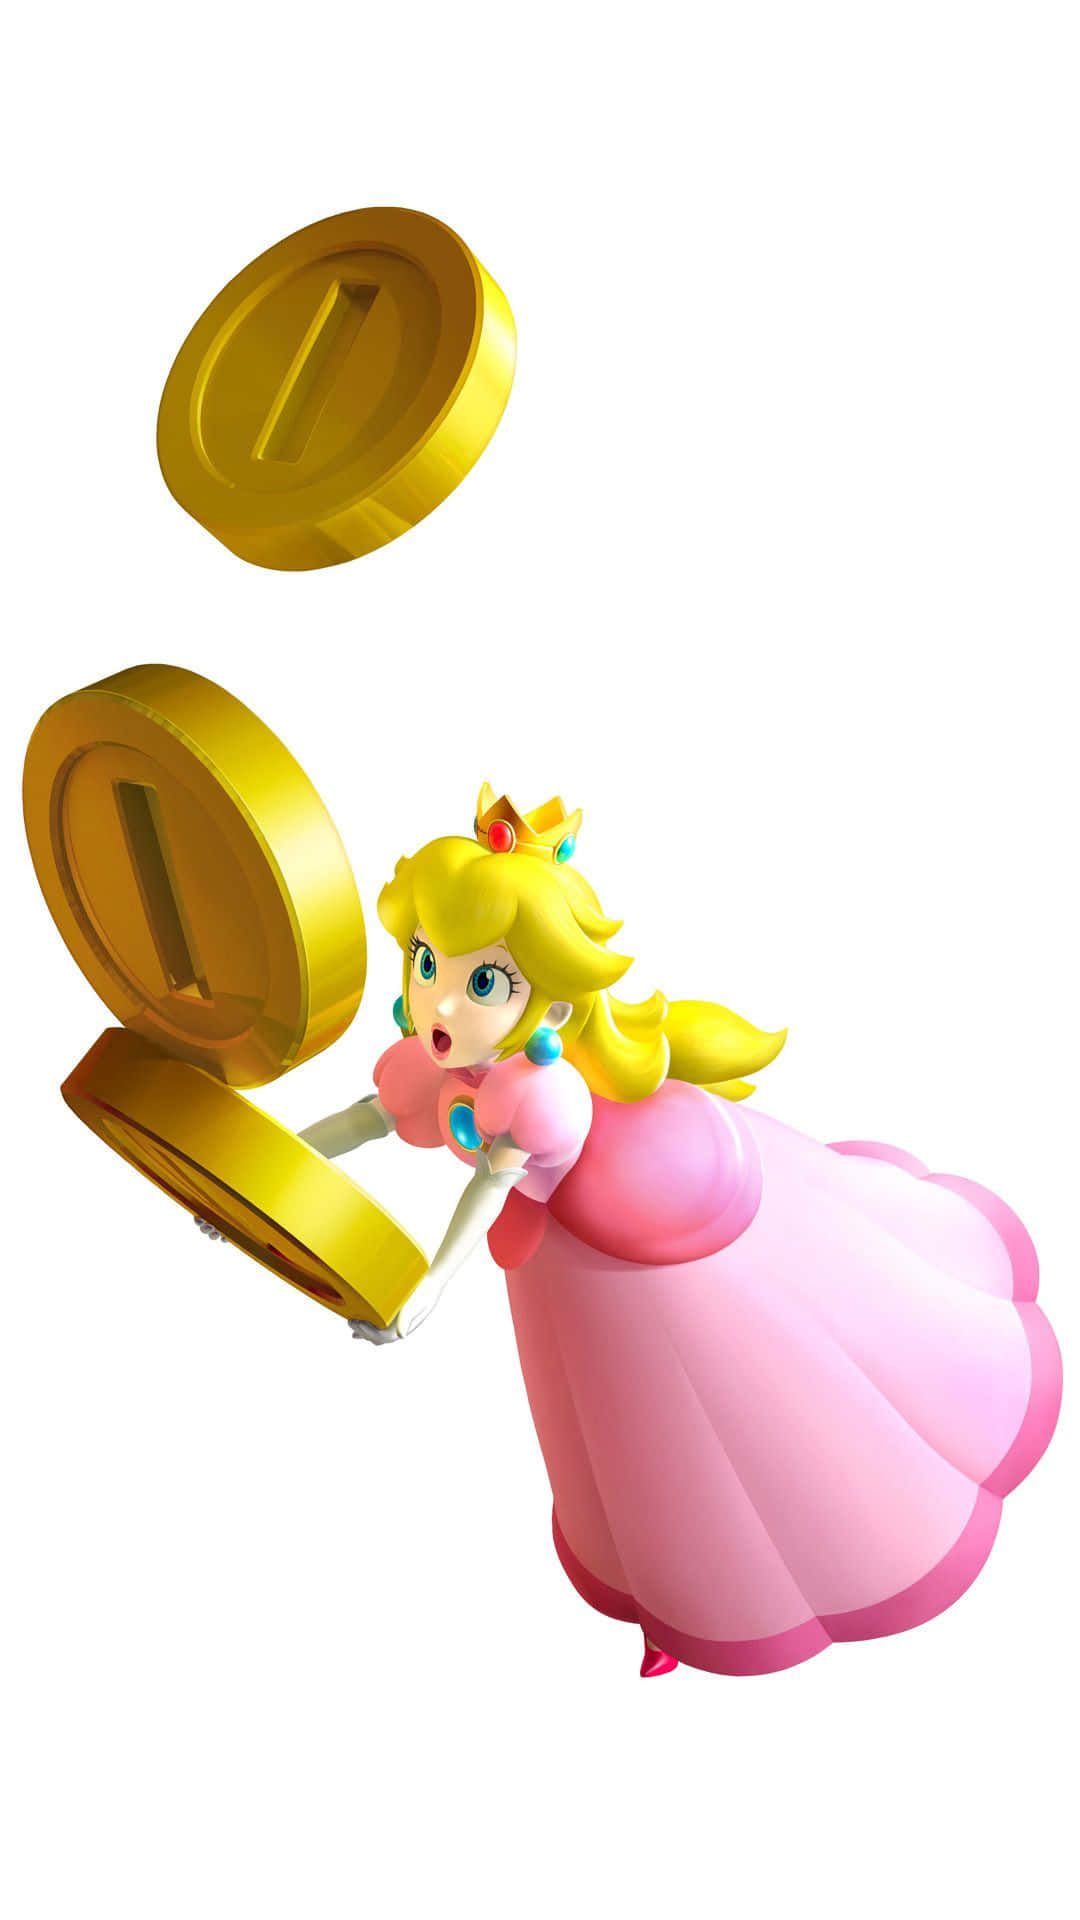 Download A Princess Holding A Gold Coin Wallpaper